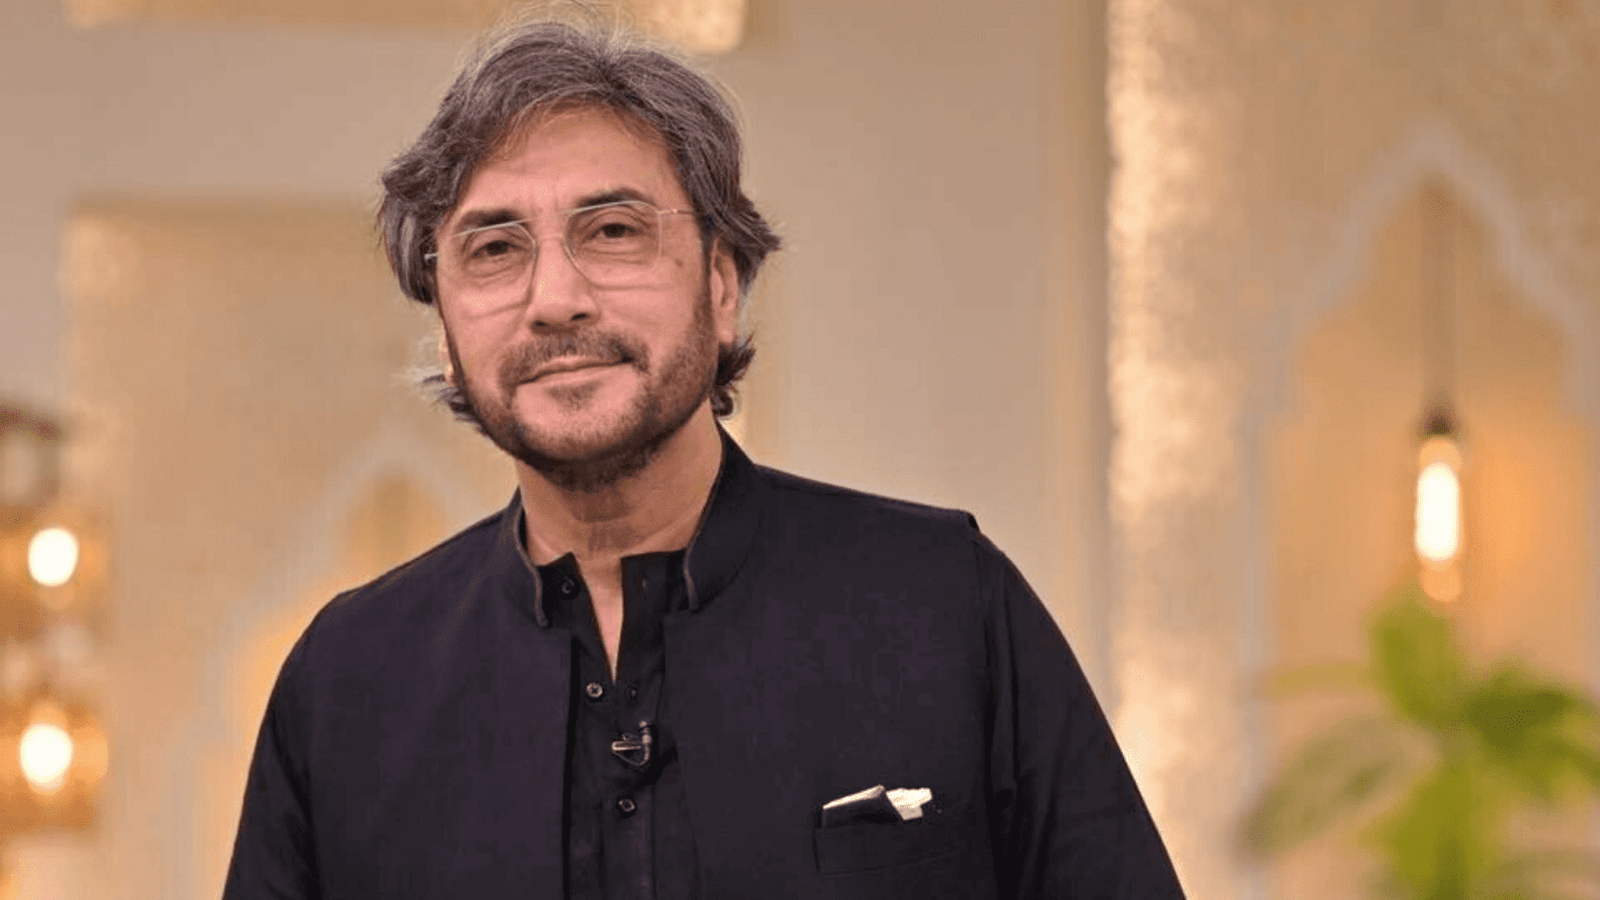 Adnan Siddiqui issues apology for ‘women are flies’ analogy